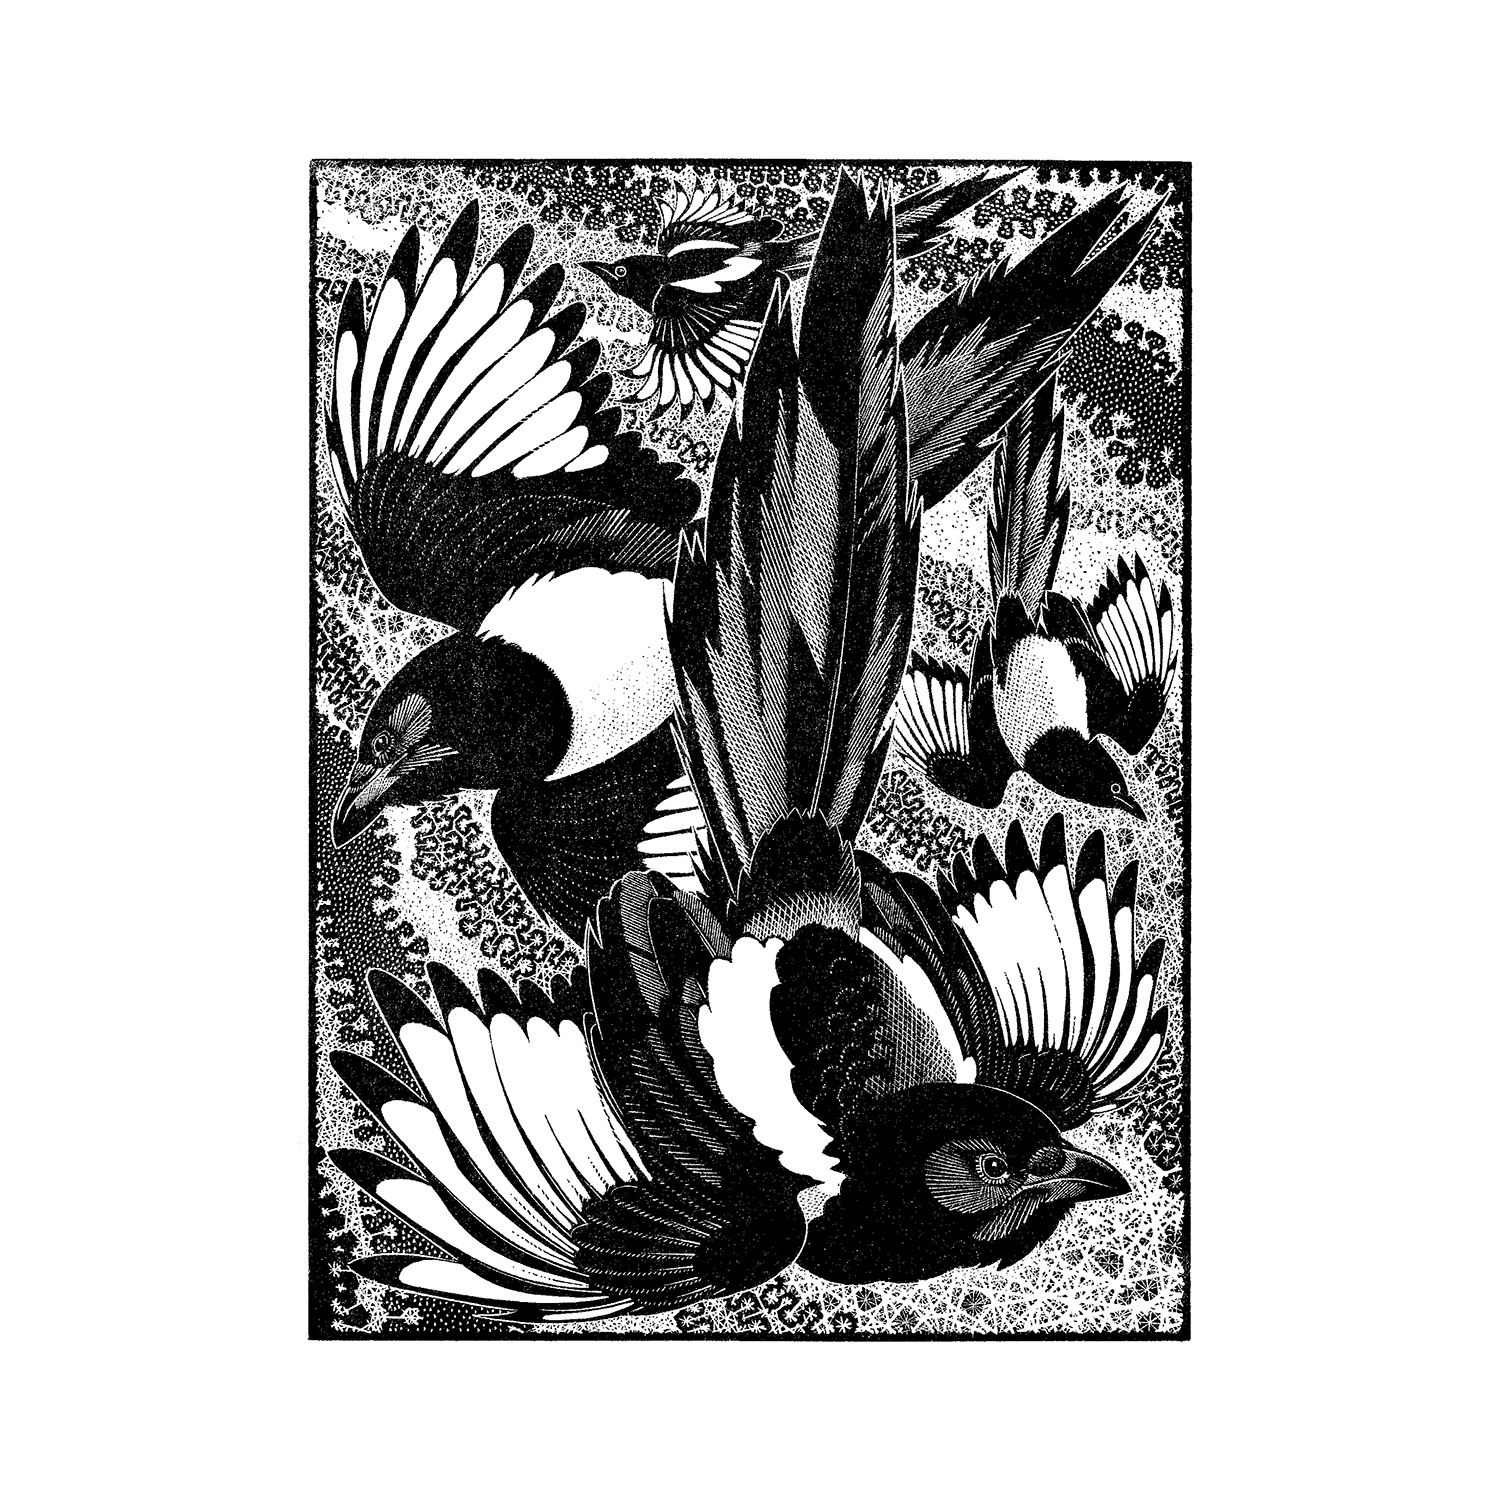 Tiding of Magpies by Colin See-Paynton